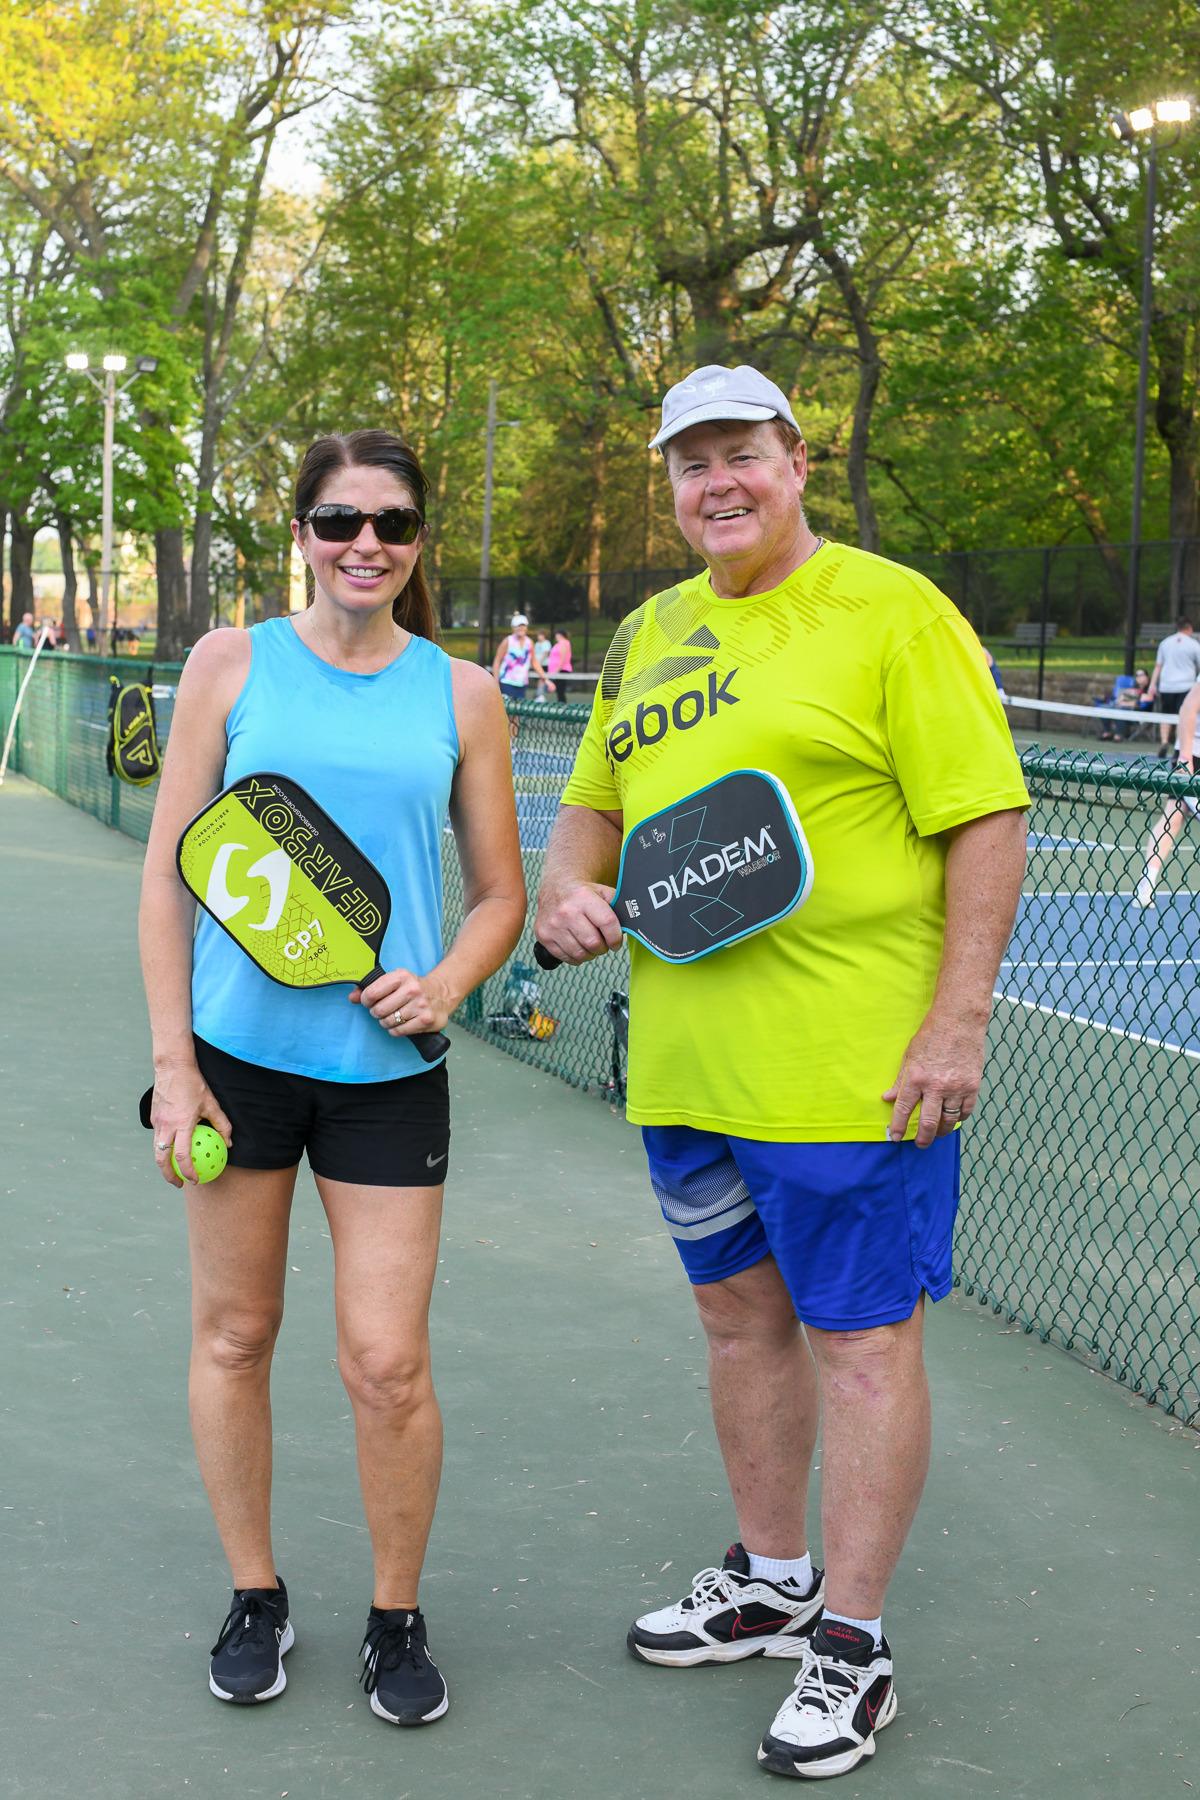 Pickleball – The Craze that's Sweeping the Tristate